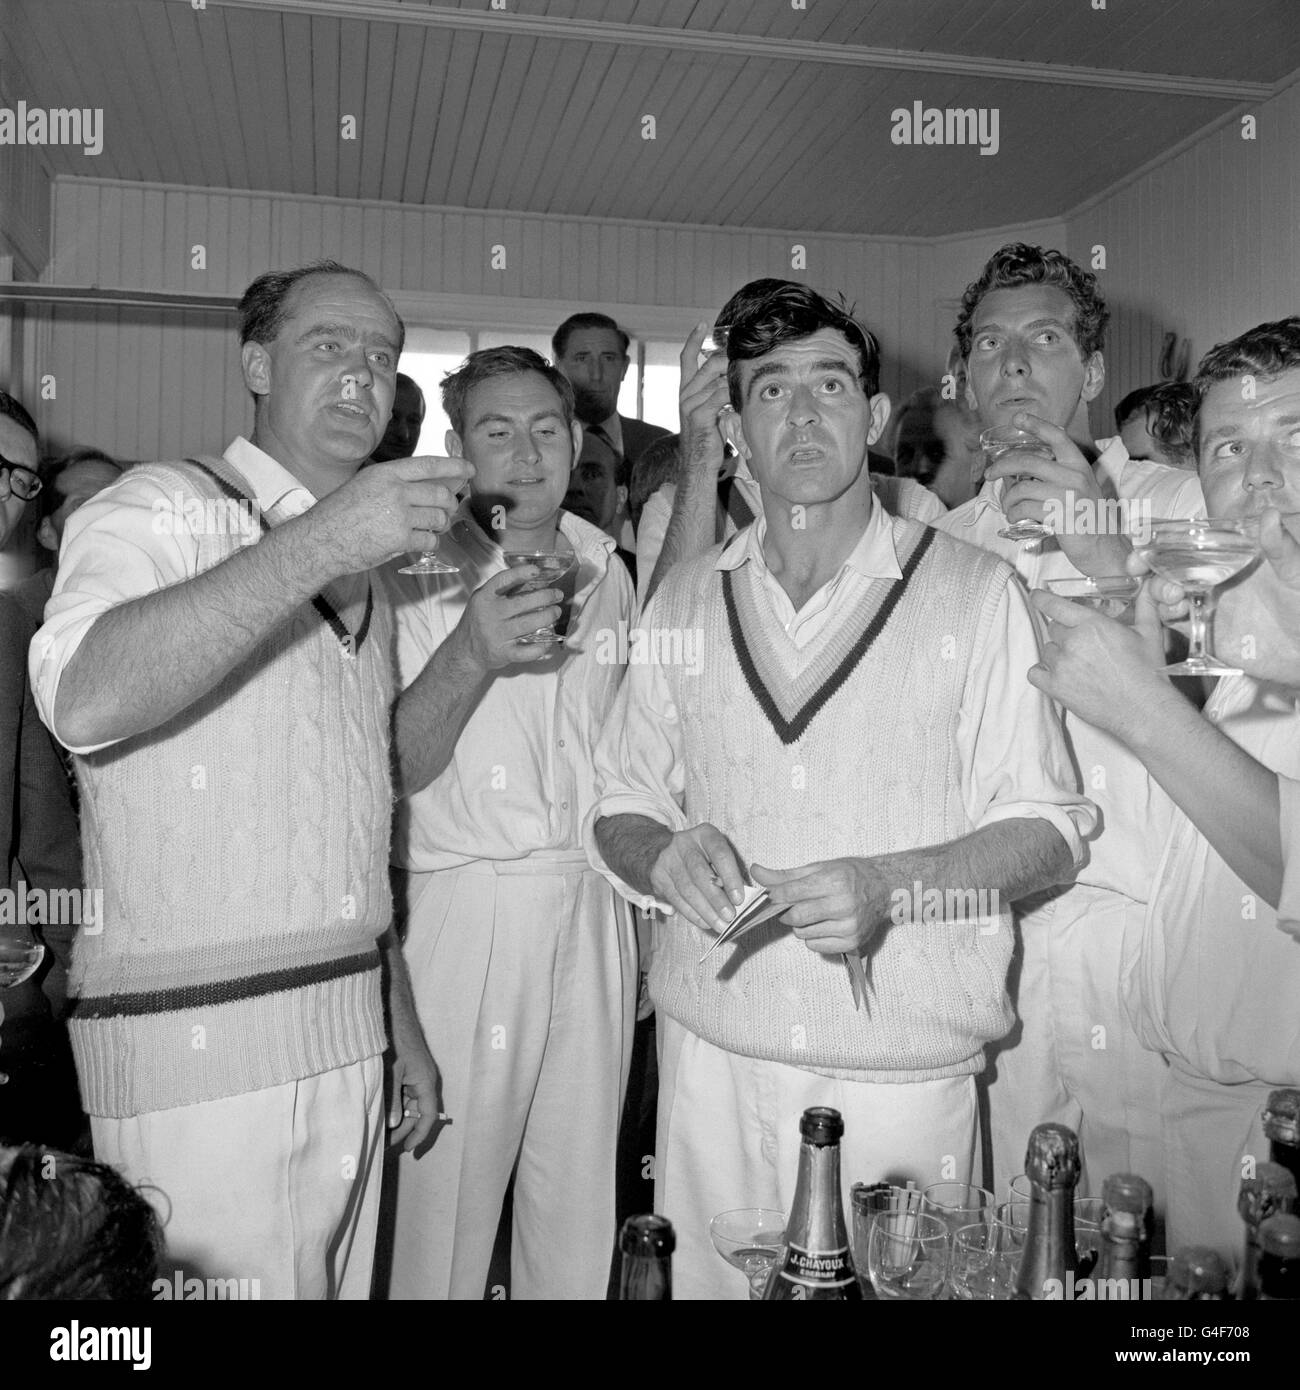 Captain Brian Close, left, toasts his team with champagne after Yorkshire won the County Championship at Harrogate. Left to right; Brian Close, Ray Illingworth, Fred Trueman, Don Wilson, and Phil Sharpe. Stock Photo